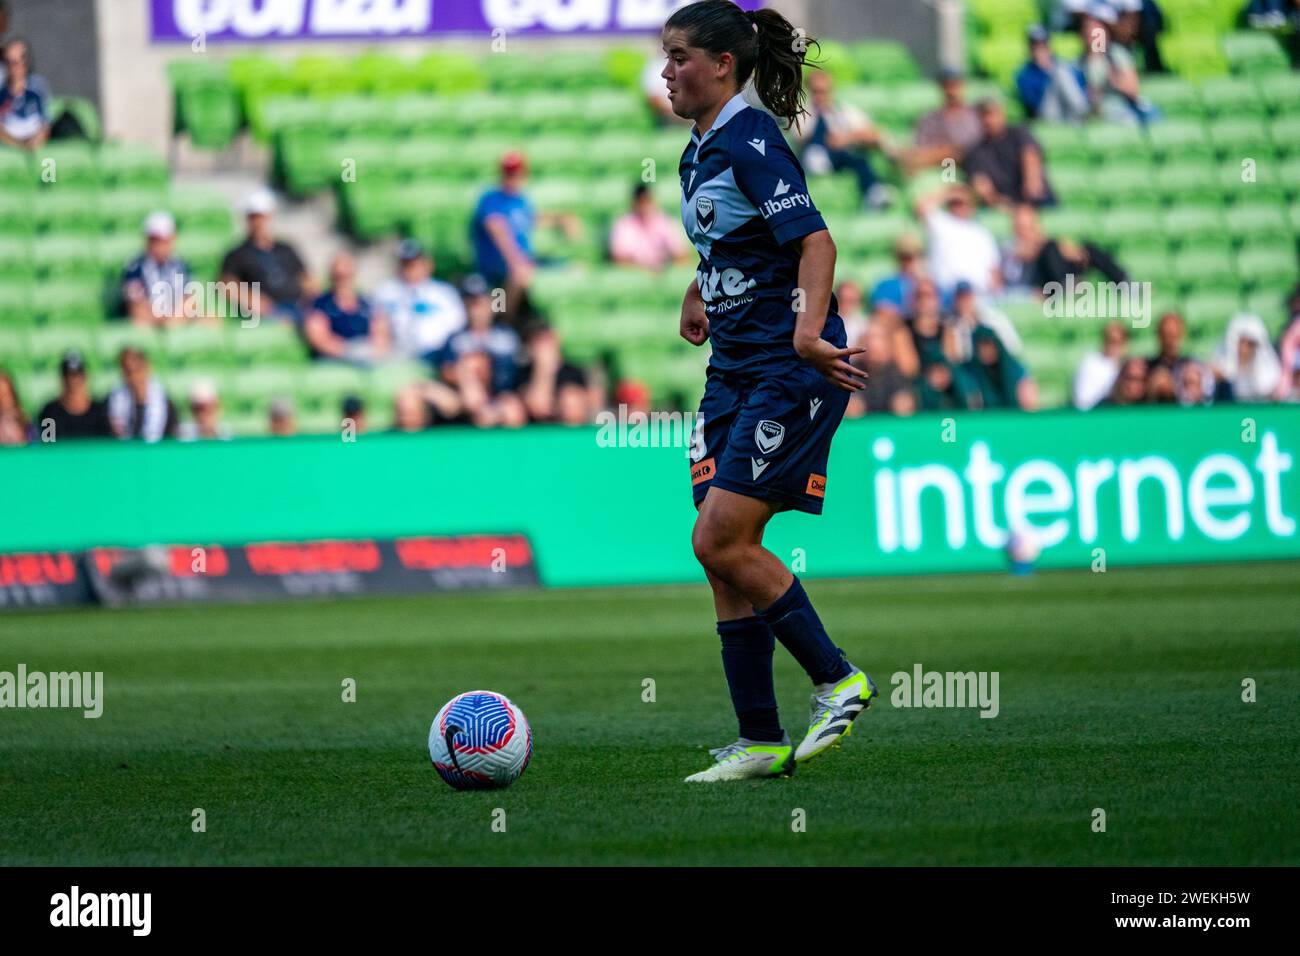 Melbourne, Australia. 26 January, 2024. Melbourne Victory FC Midfielder Rachel Lowe (#23) looks for a pass during the Liberty A-League Women’s match between Melbourne Victory FC and Sydney FC at AAMI Park in Melbourne, Australia. Credit: James Forrester/Alamy Live News Stock Photo